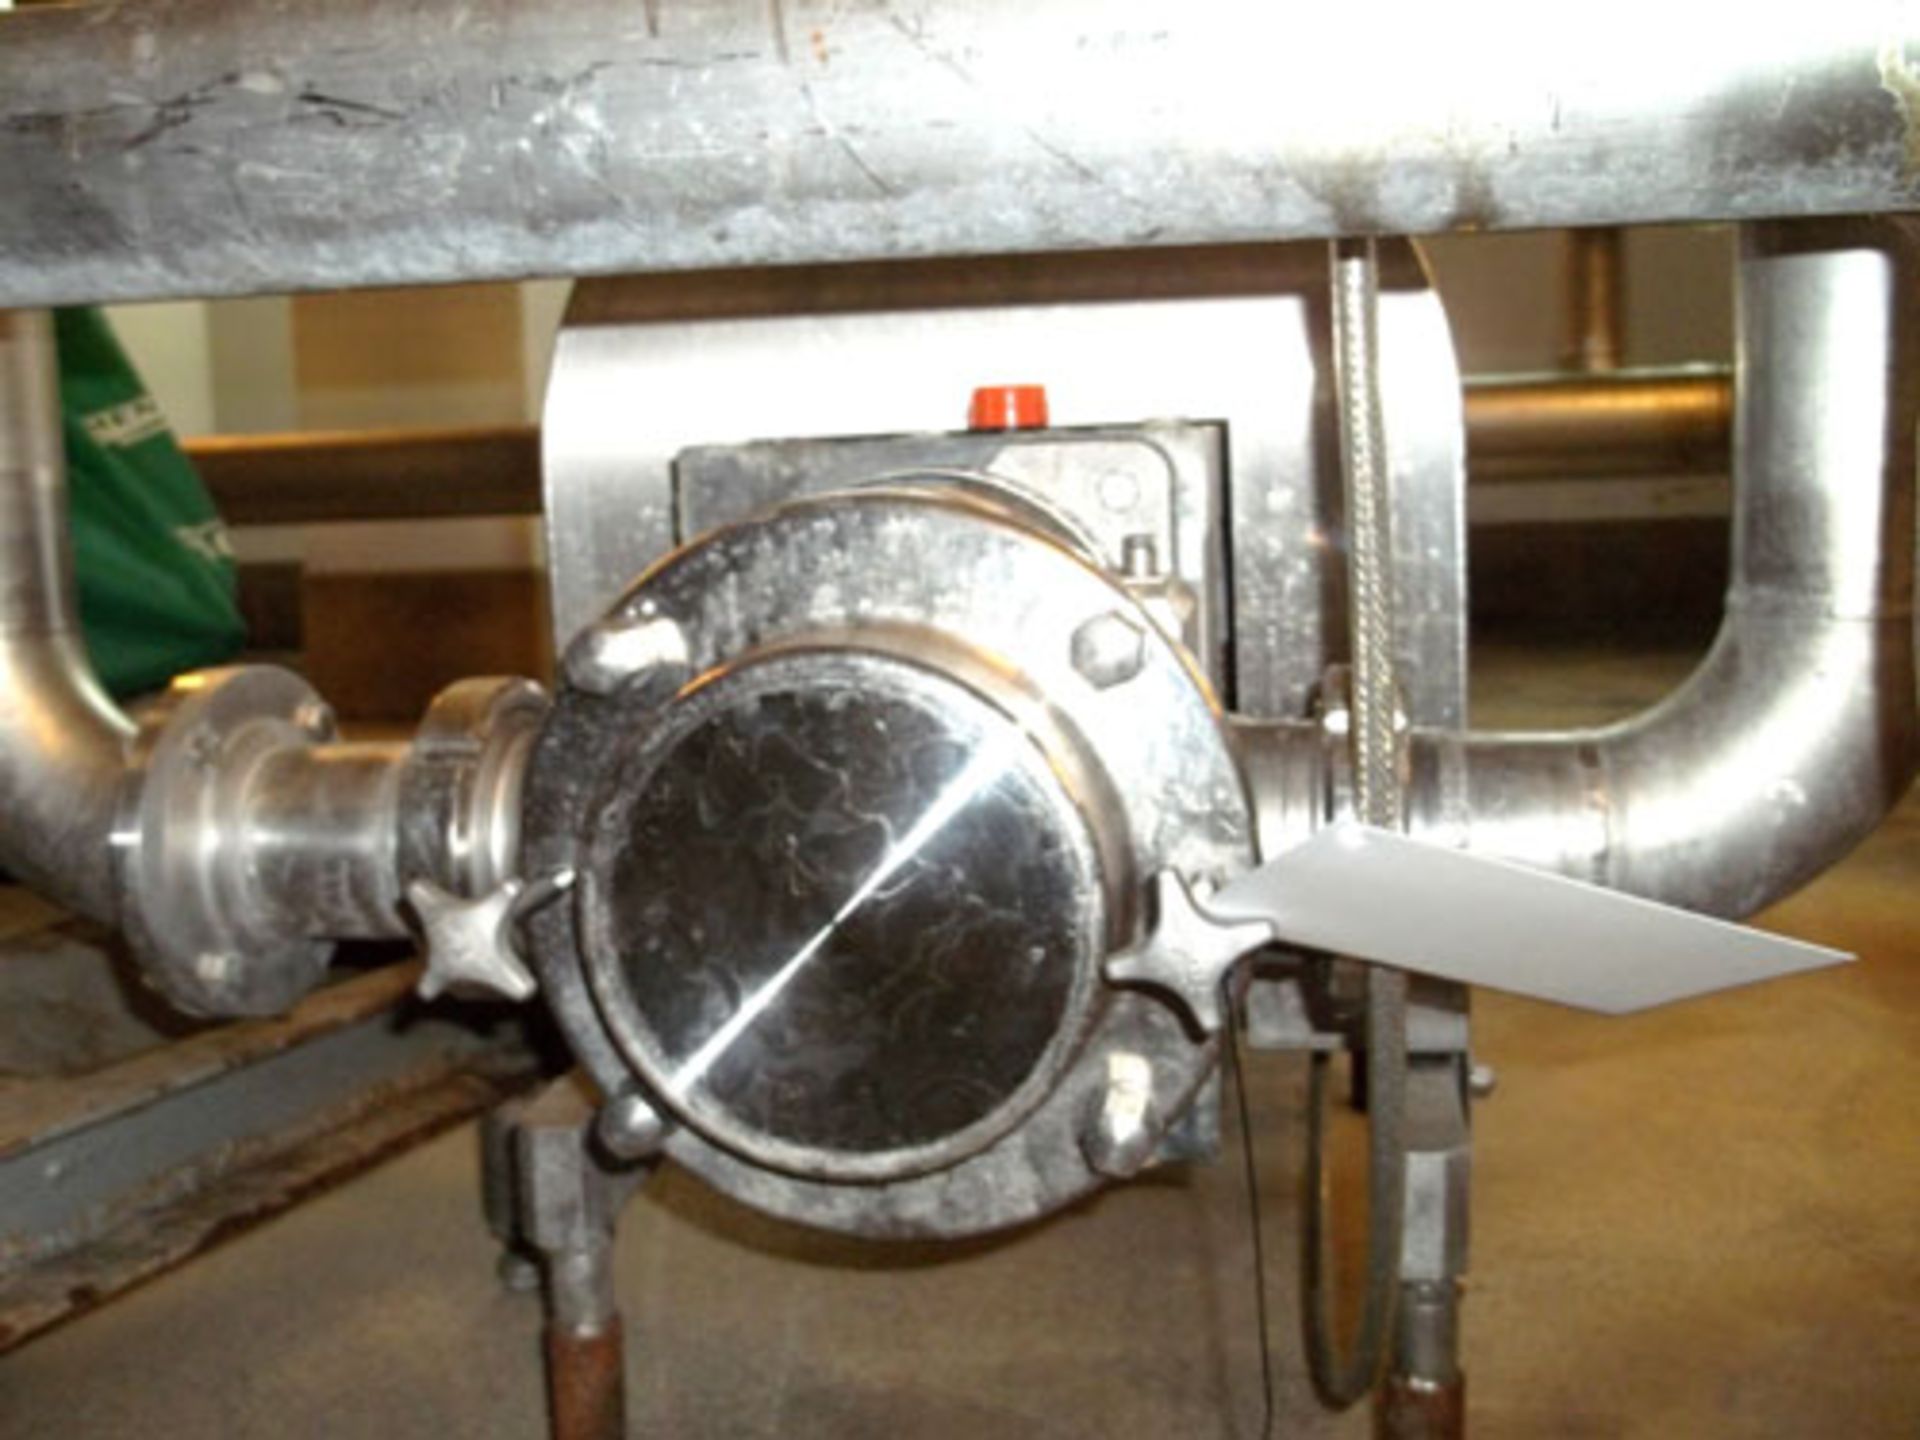 Fristam 3KW Pump, Model FKF 40/45, Stainless Steel. Serial# 0623550020, New 2012. (Dismantling and - Image 2 of 4